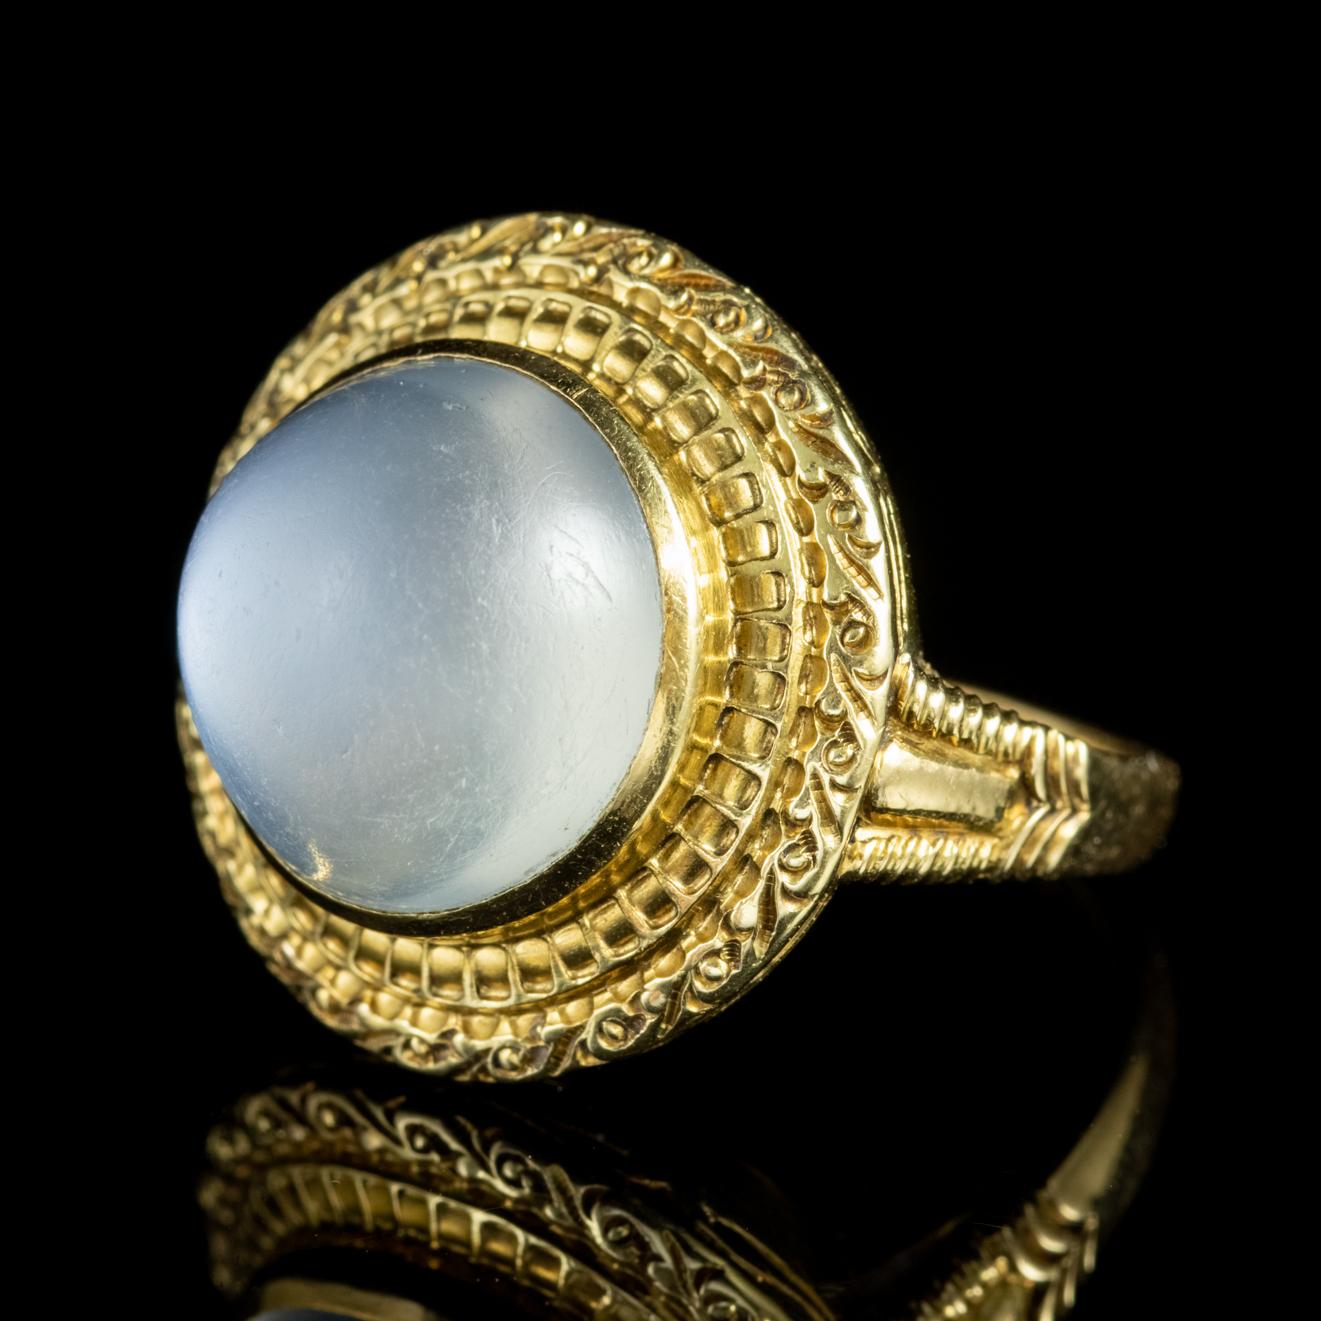 A striking antique French ring from the late 19th century adorned with a lovely cabochon Moonstone which is an impressive 12ct stone.    

The Moonstone has a lovely ghostly hue and a luminous surface similar to that of Moonlight. They are said to